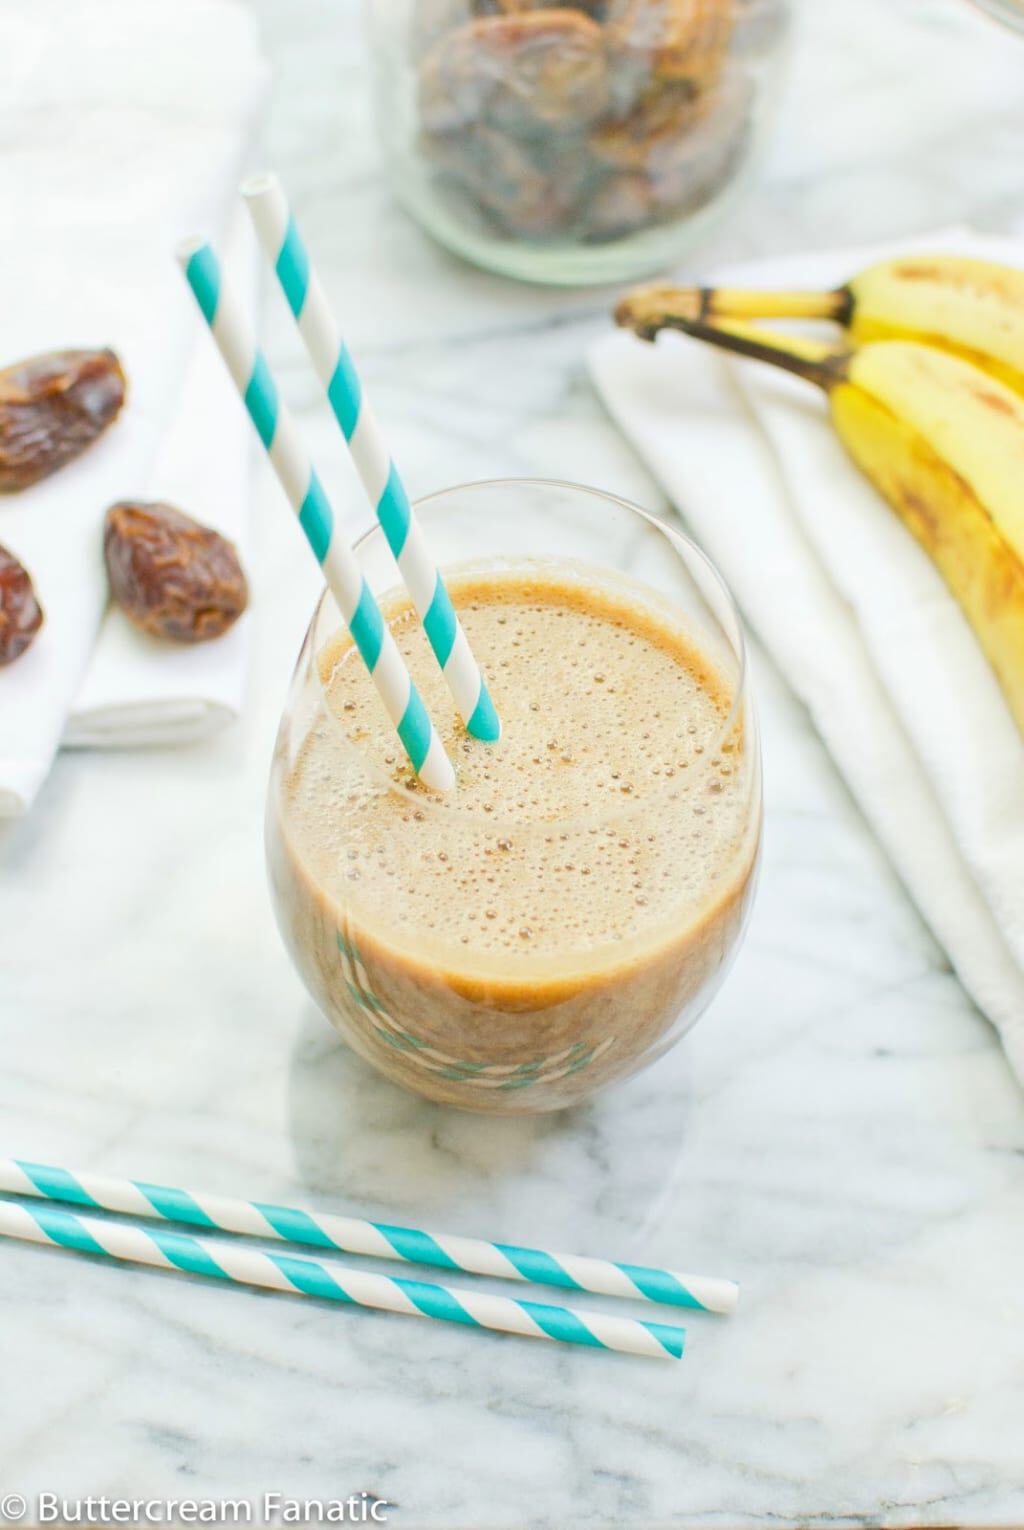 Healthier copycat Frappuccinos that are dairy-free, refined sugar free, and vegan! So easy to make with only 6 ingredients and a blender!